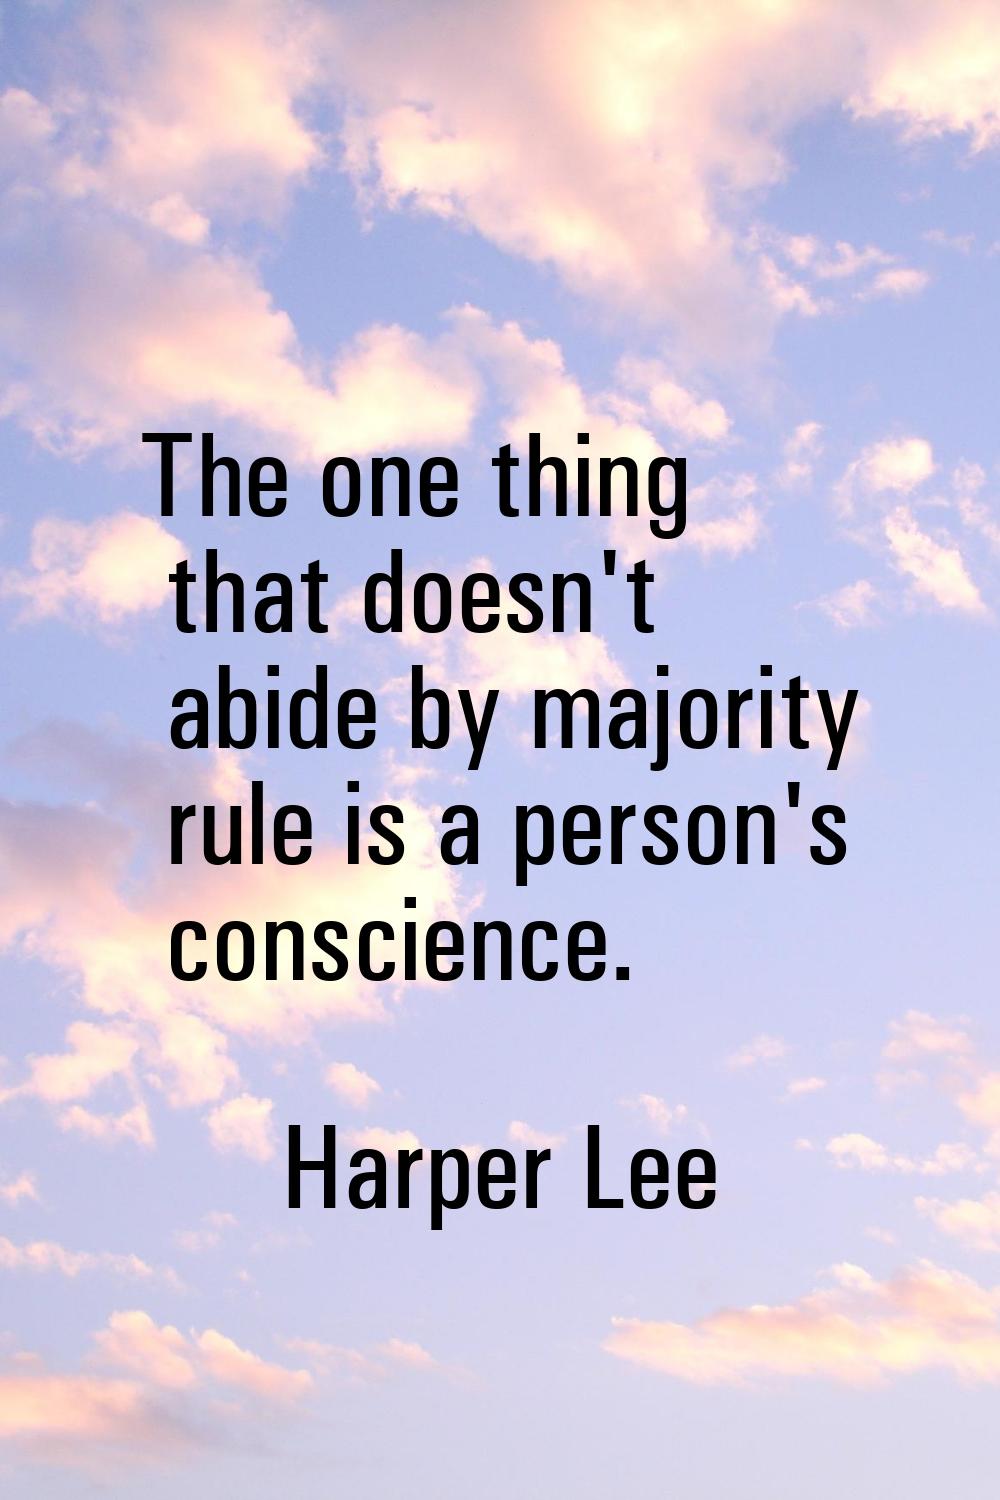 The one thing that doesn't abide by majority rule is a person's conscience.